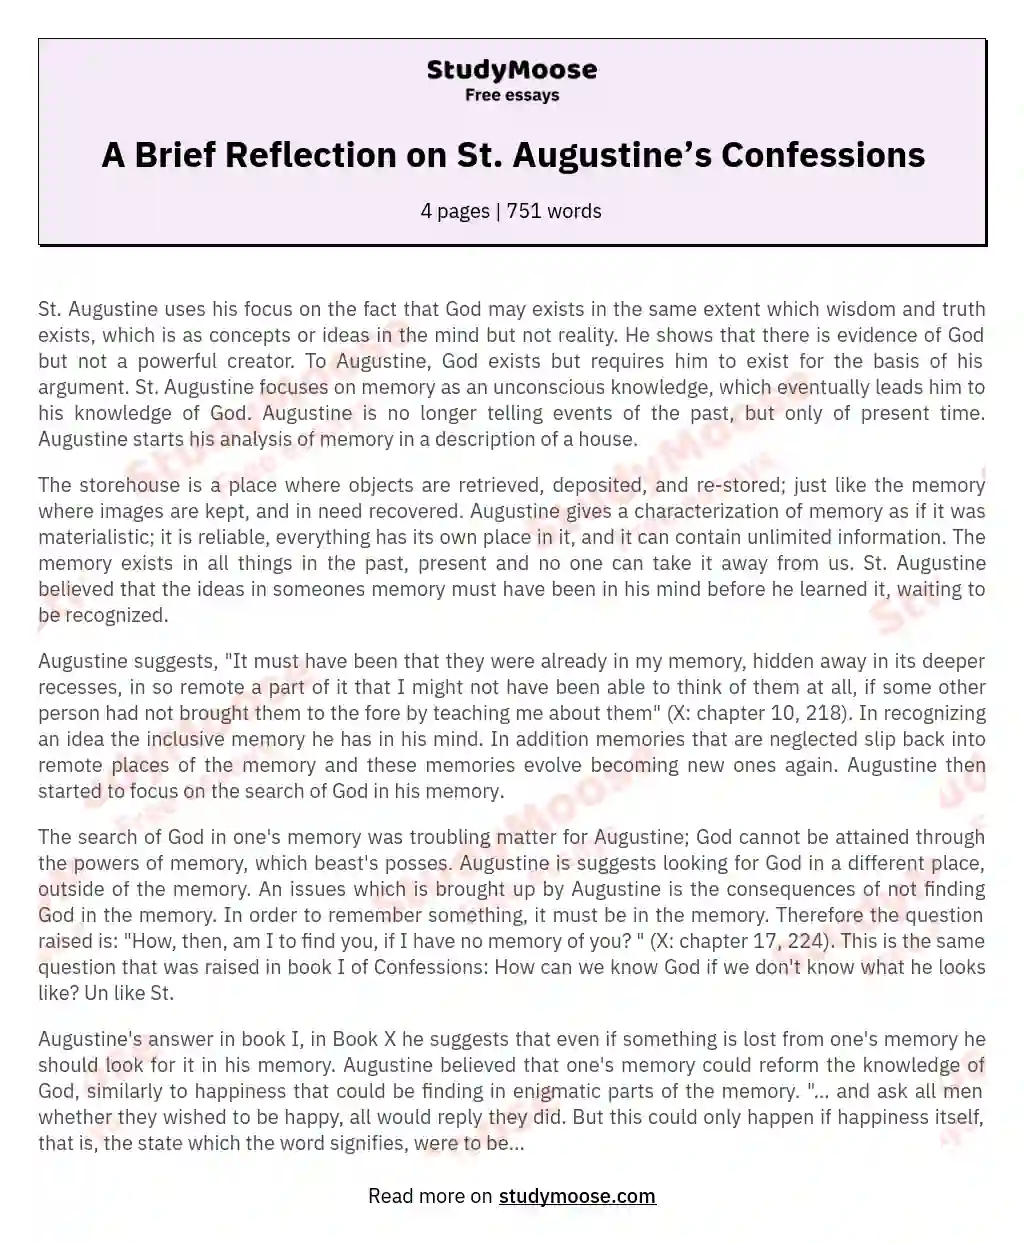 A Brief Reflection on St. Augustine’s Confessions essay